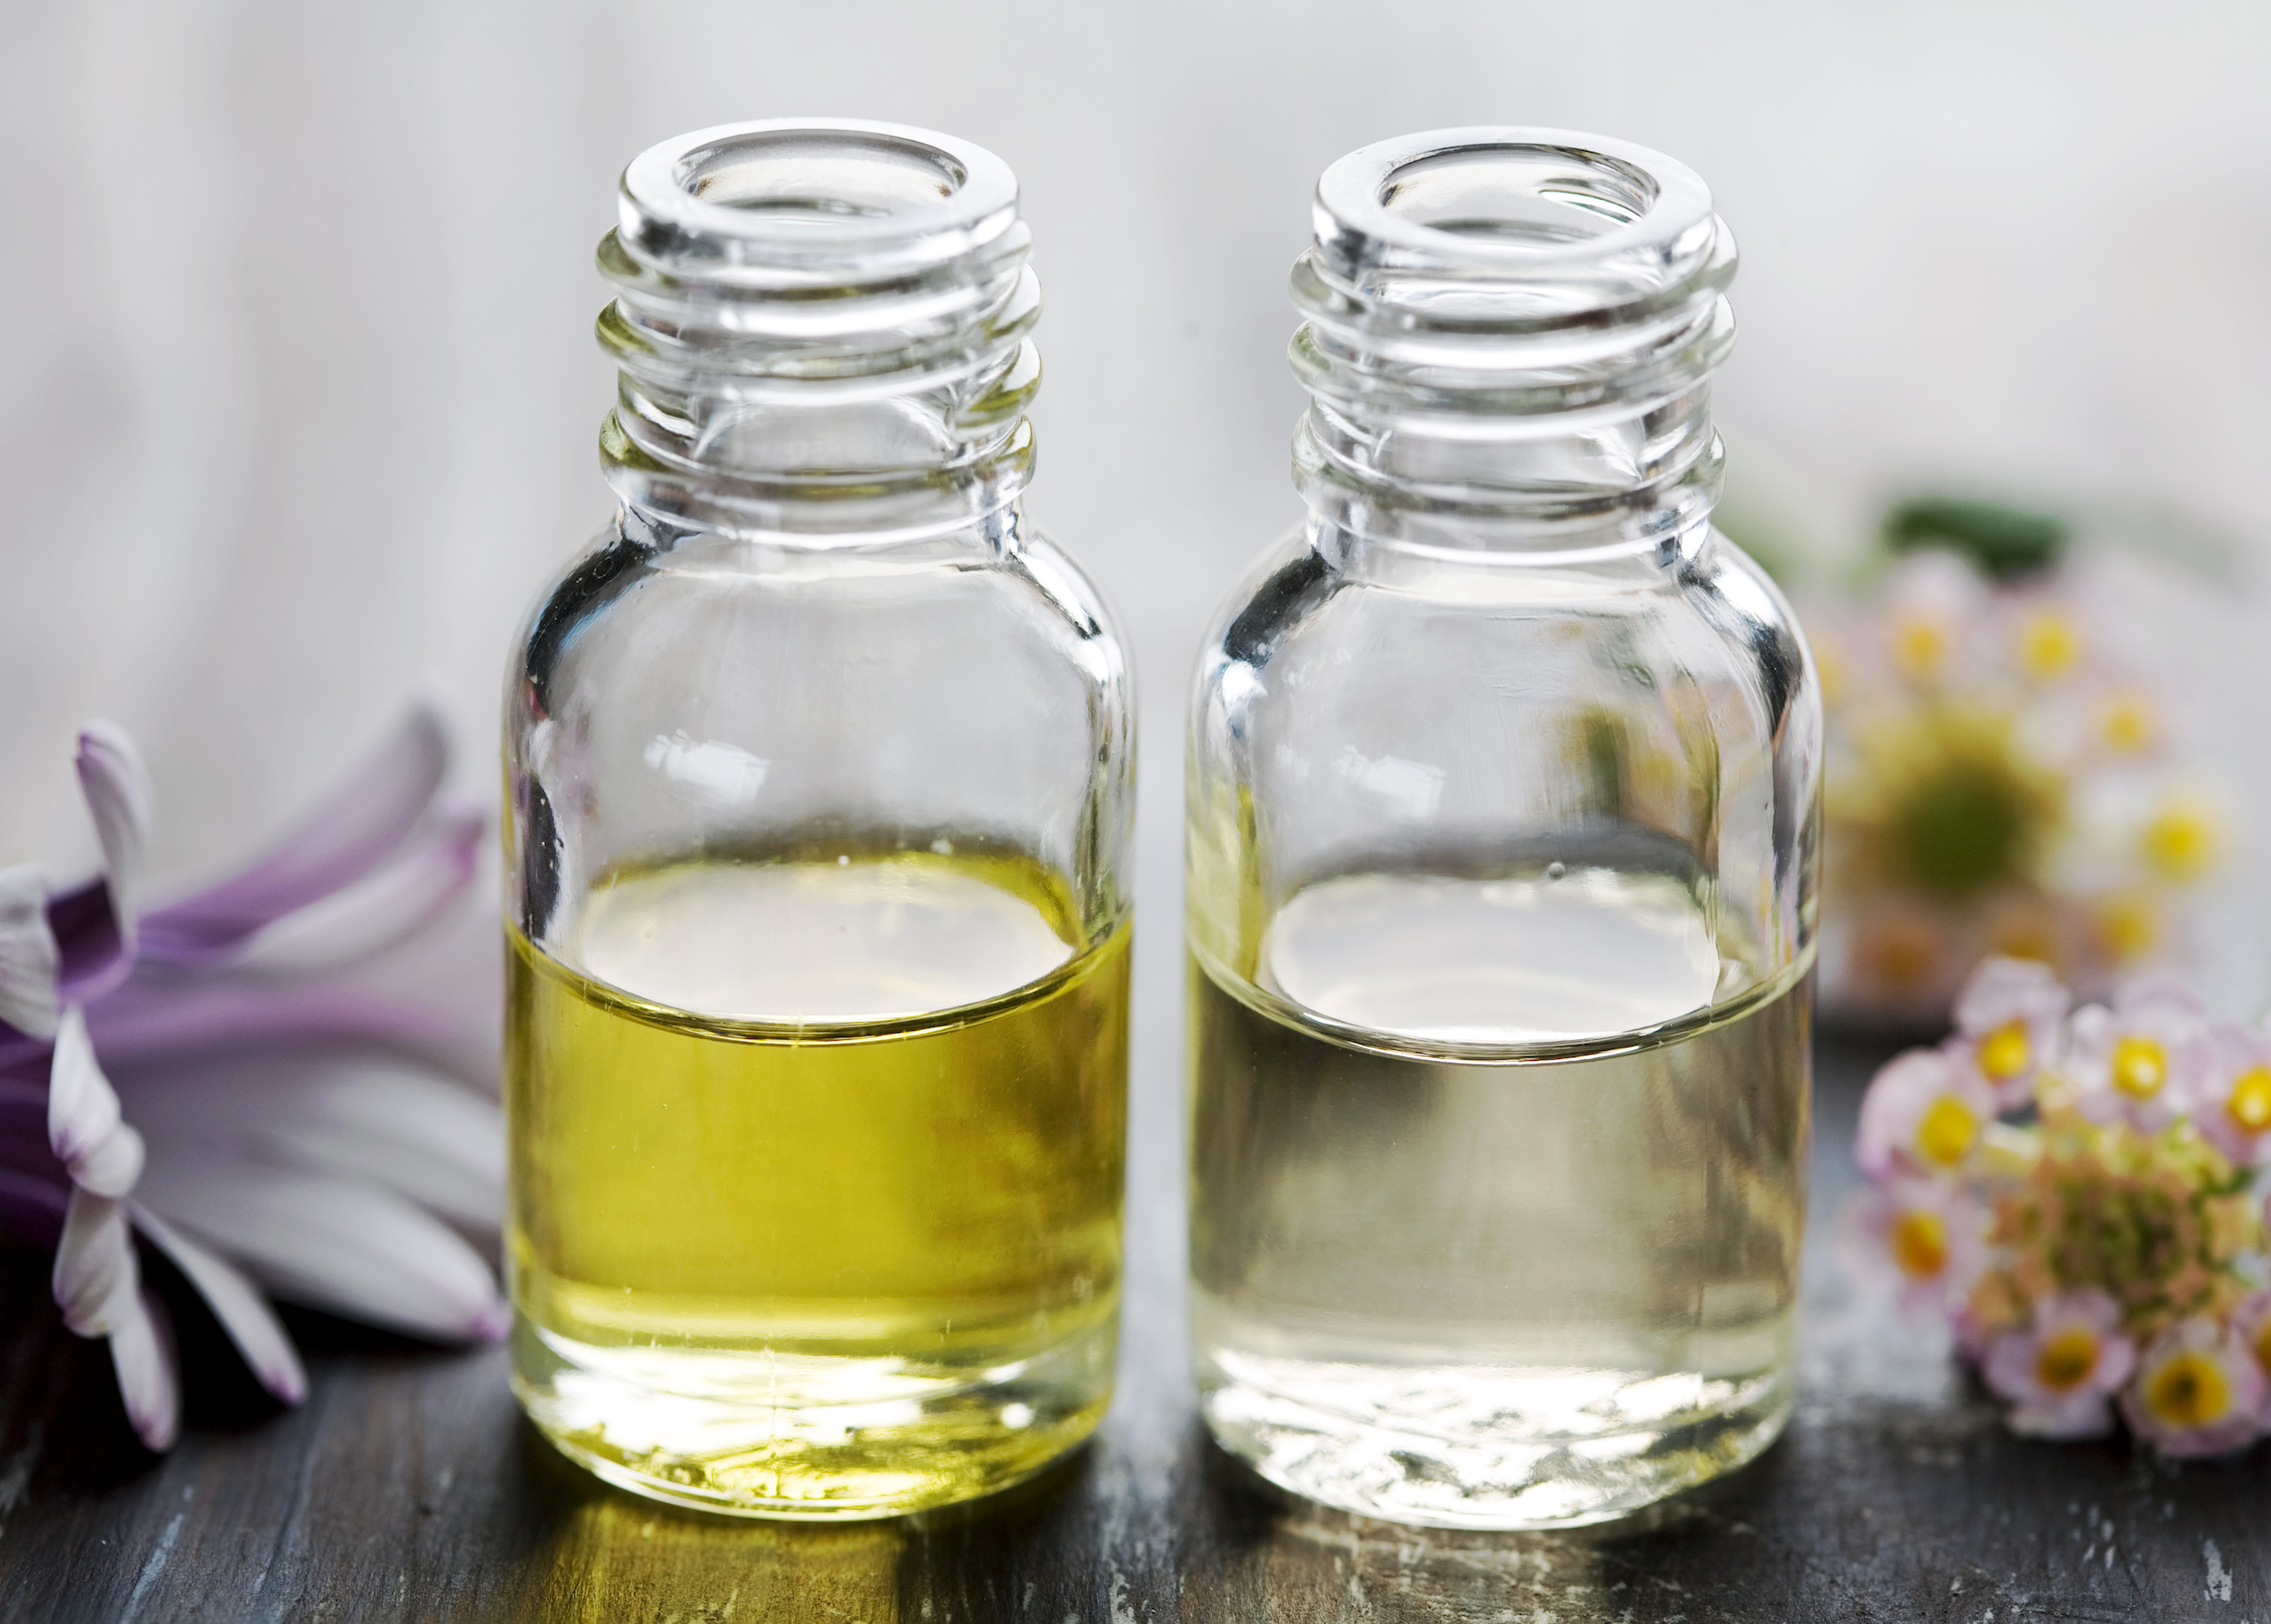 DIY roll on essential oil recipes and safe natural perfumes to make at home. Stop using chemicals, choose non-toxic essential oil recipes you'll love. 